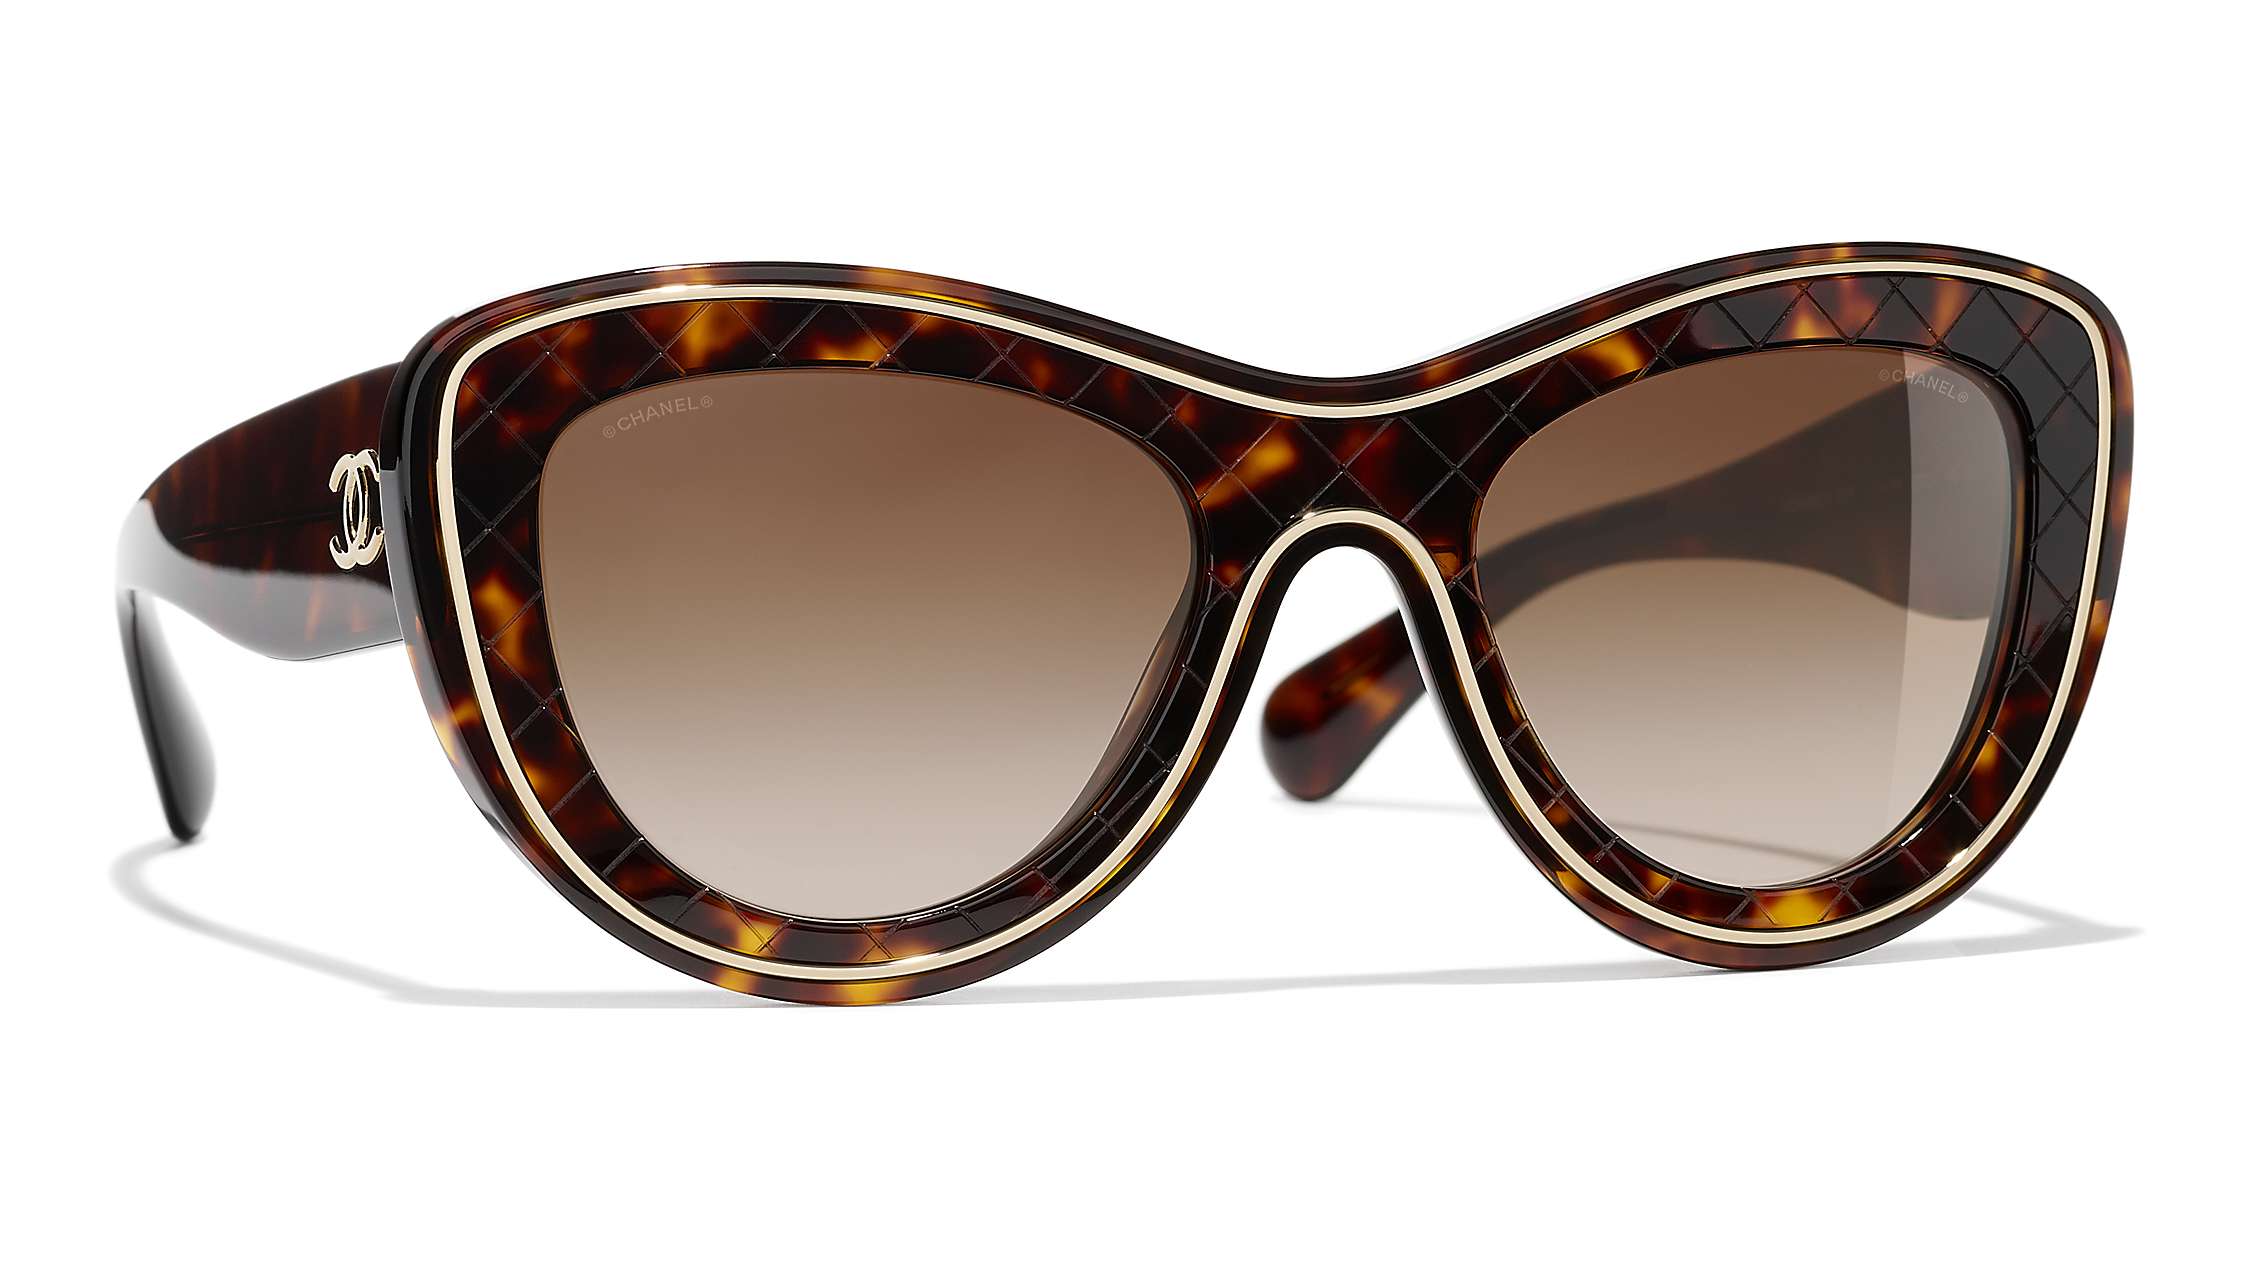 Buy CHANEL Butterfly Sunglasses CH5397 Havana/Brown Gradient Online at johnlewis.com